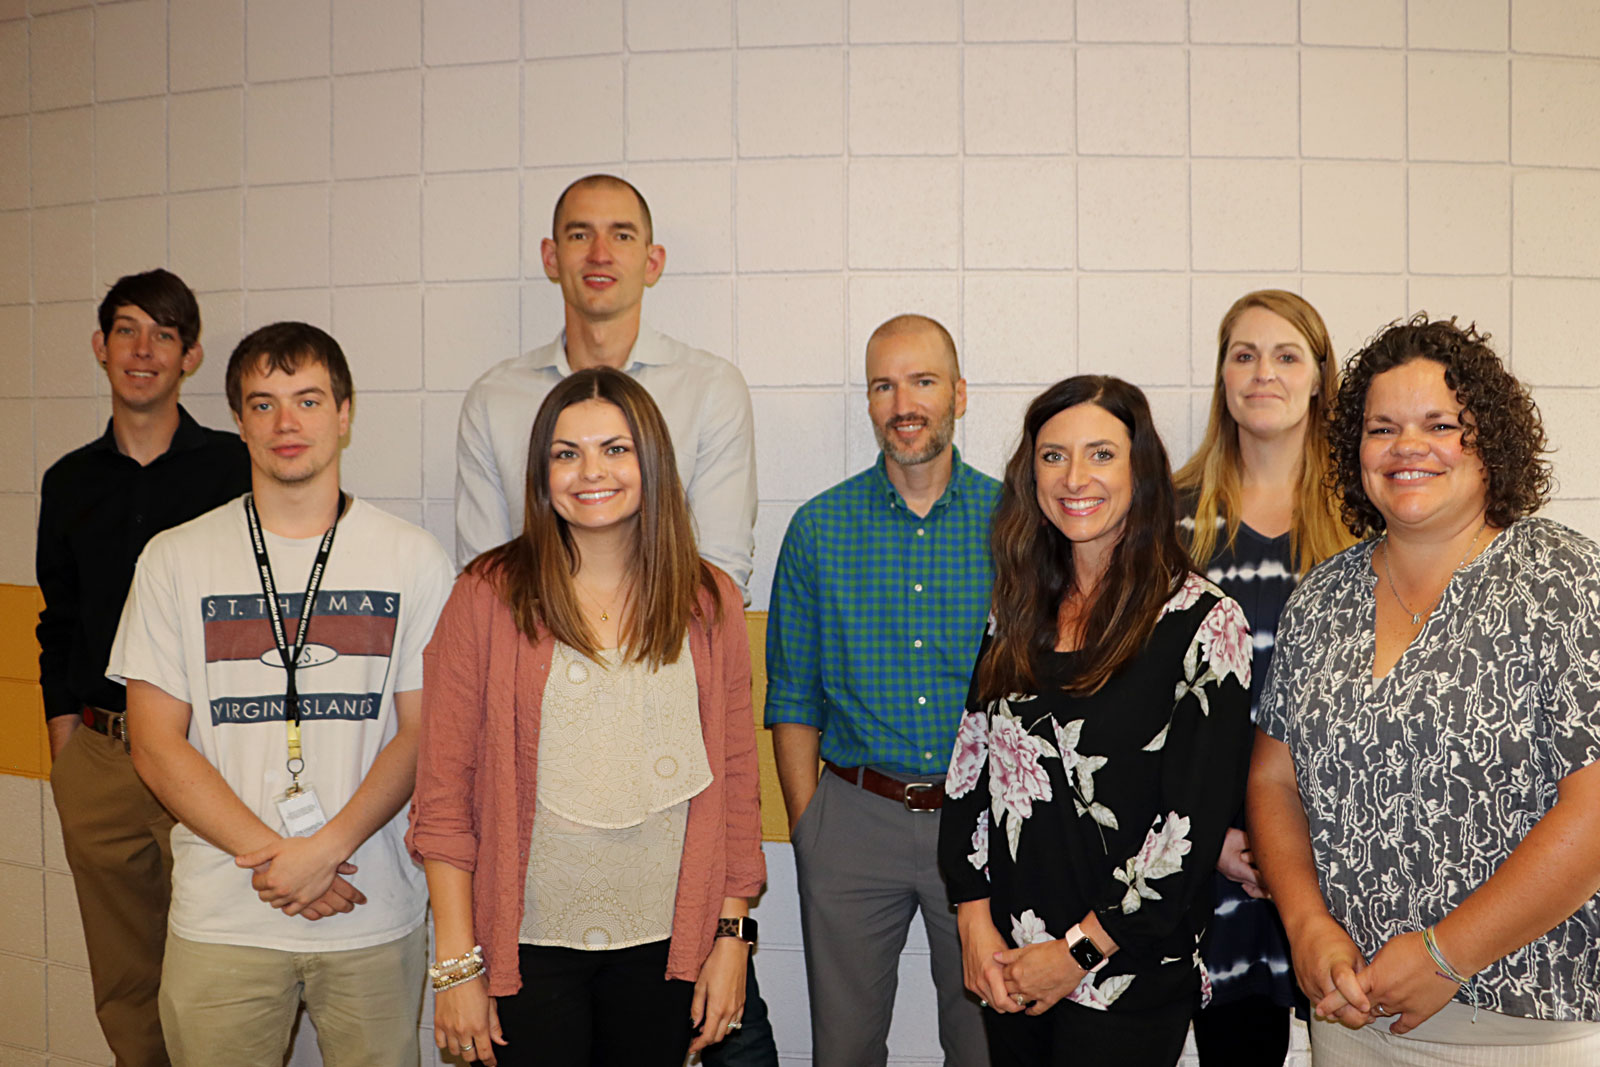 Left to Right Back row: Mr. Gerald (Oobie) Hawkes, Dr. Geoff Peck, Bryan Hart, and Crystal Ringle - Left to Right Front row: Ethan Wilhoit, Ms. Amber Salmon, Dr. Monica Teichert, and Ms. Kasey Powell